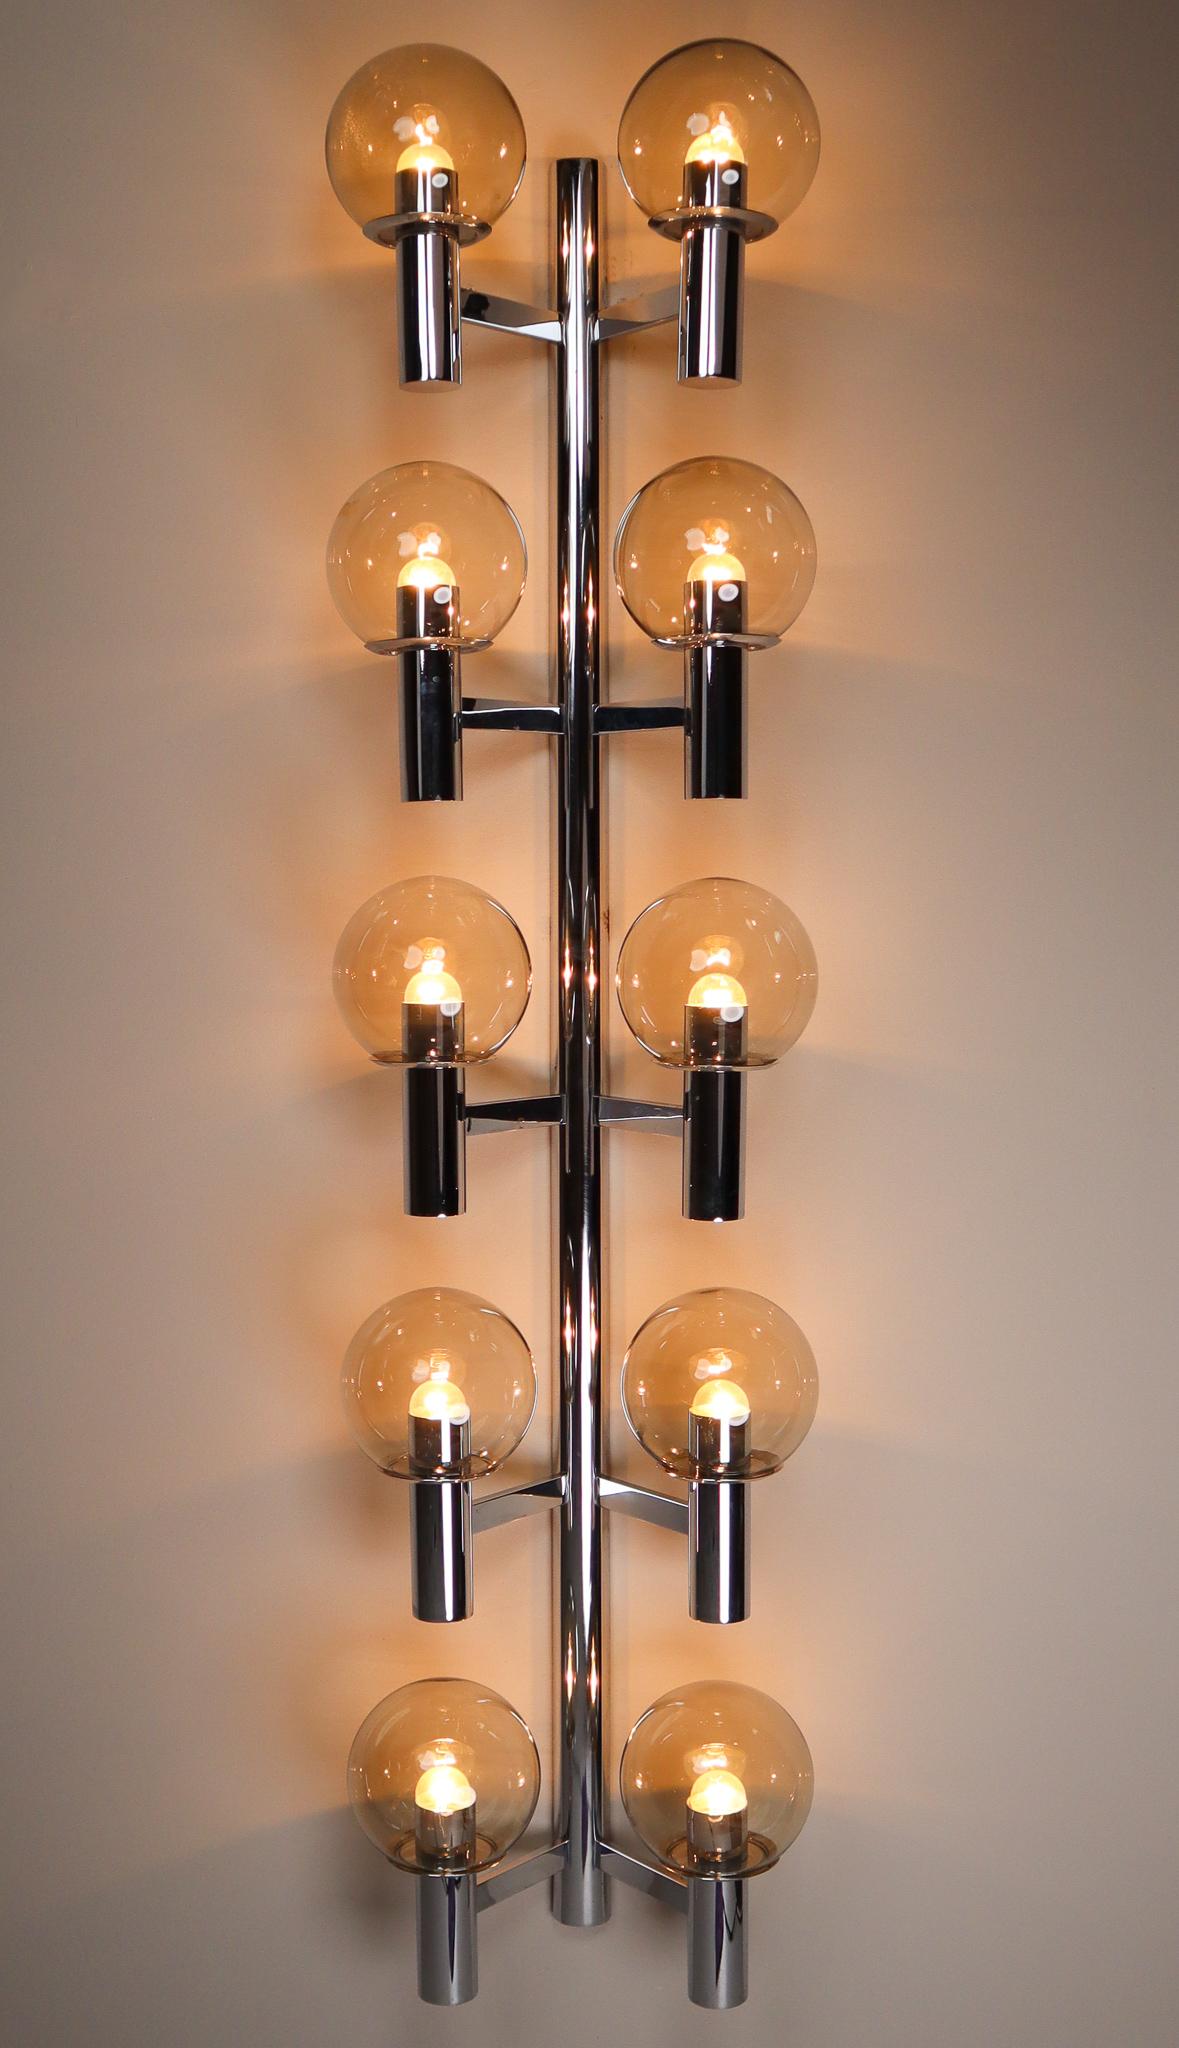 Set of 10 large Mid-Century Modern chrome wall lights- sculptures produced in Italy, 1970s. The pleasant light it spreads is very atmospheric, these wall scones or fixtures will contribute to a luxurious character of the (hotel-bar) interior.